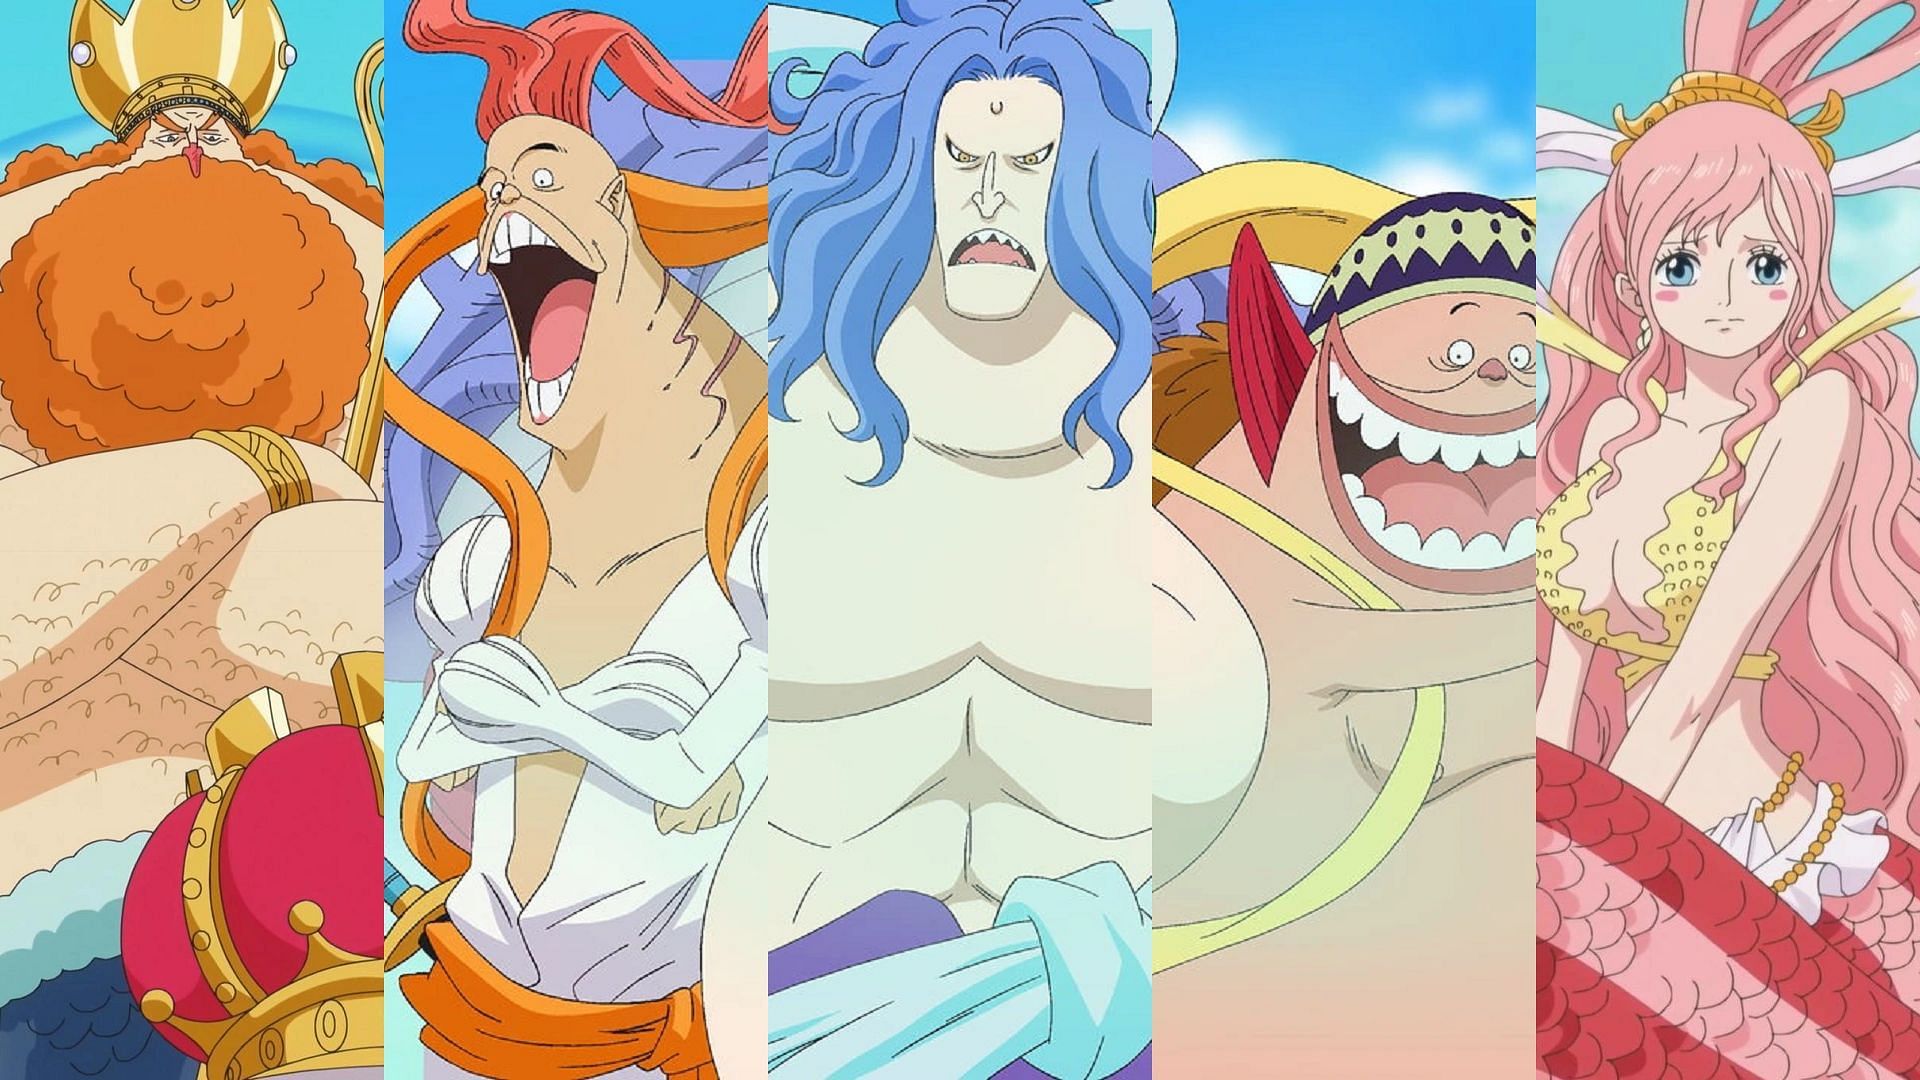 The Neptune Family in One Piece (Image via Toei Animation, One Piece)